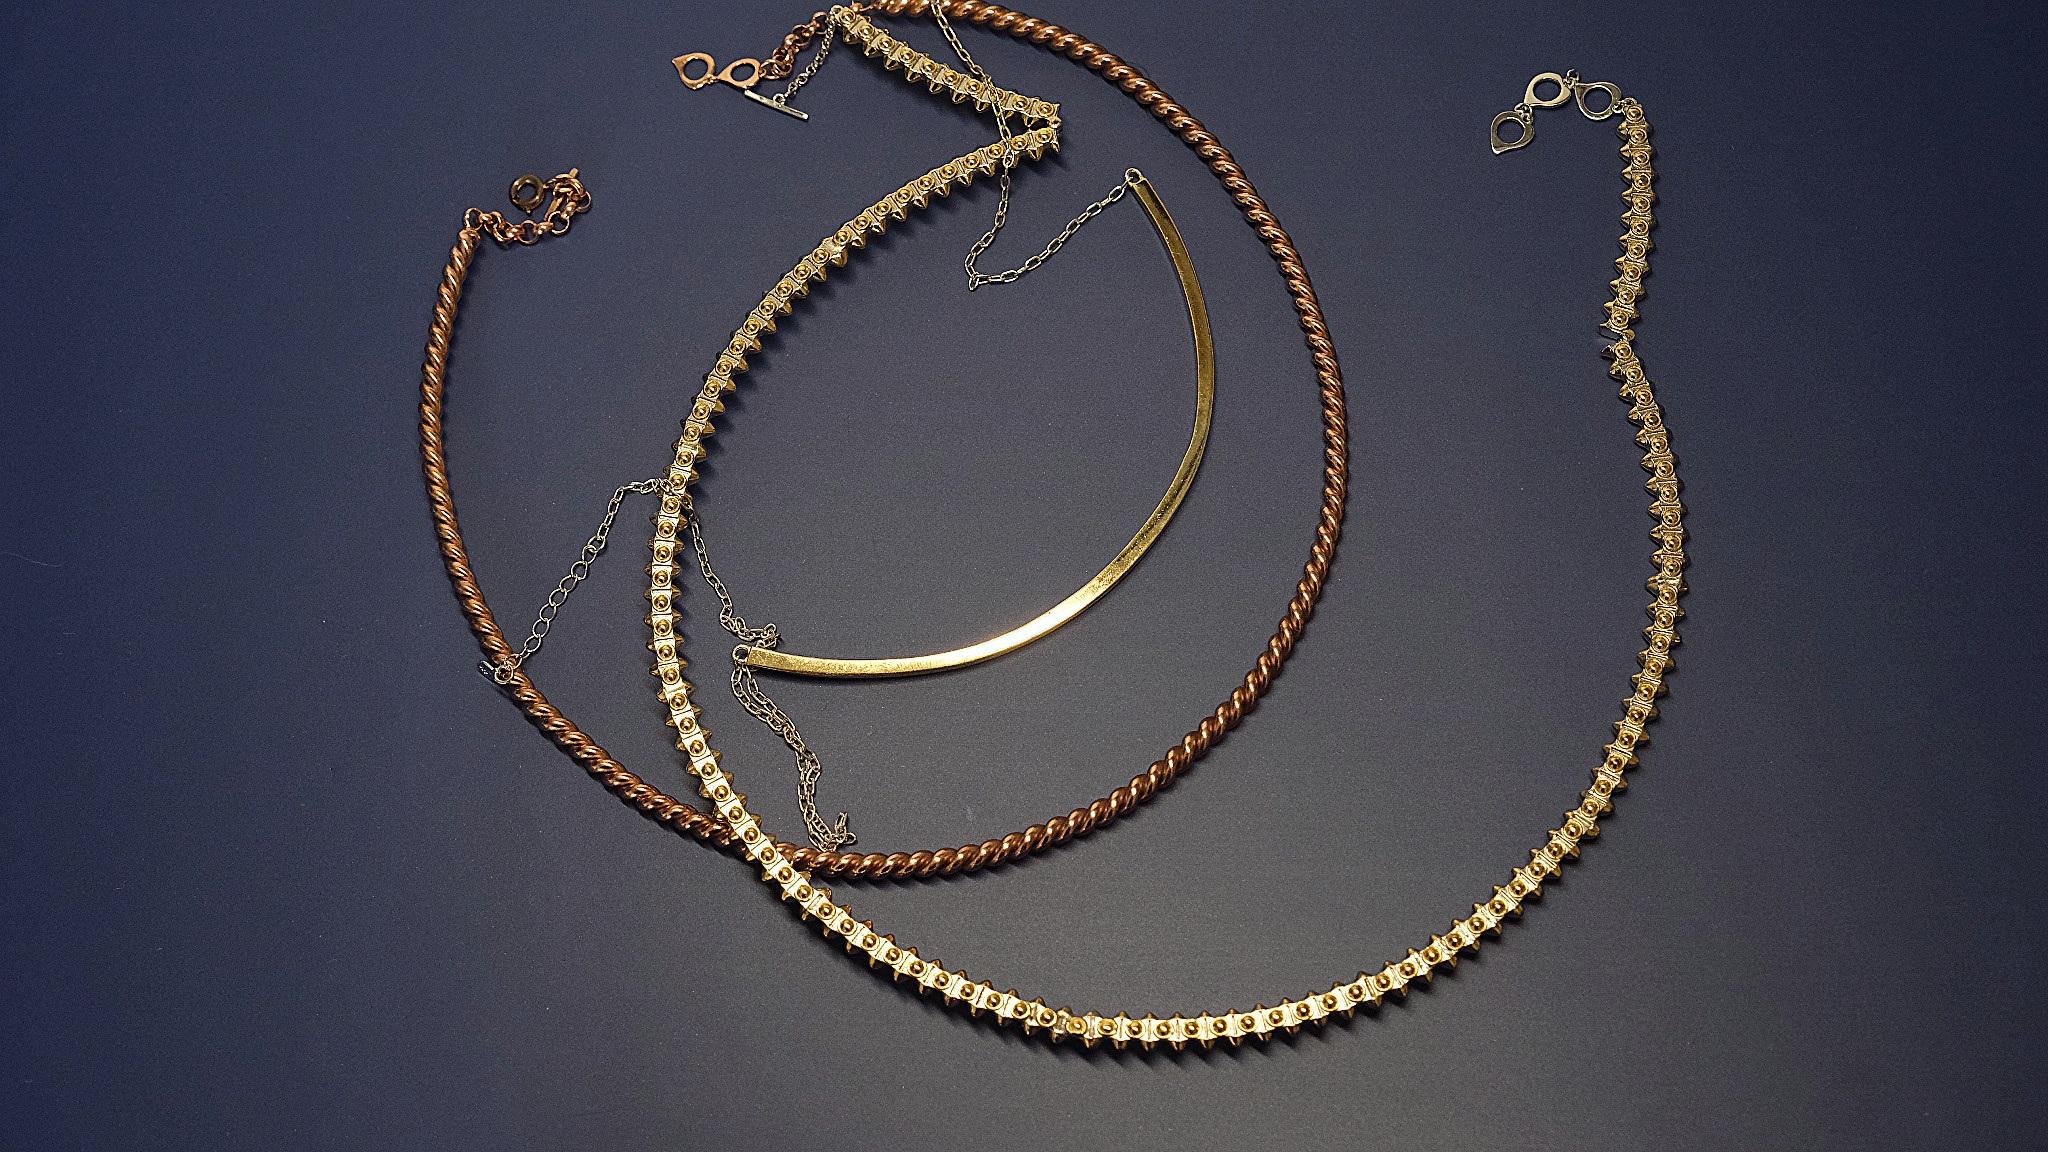 Katy Necklace II, 18k Gold, White Gold For Sale 5